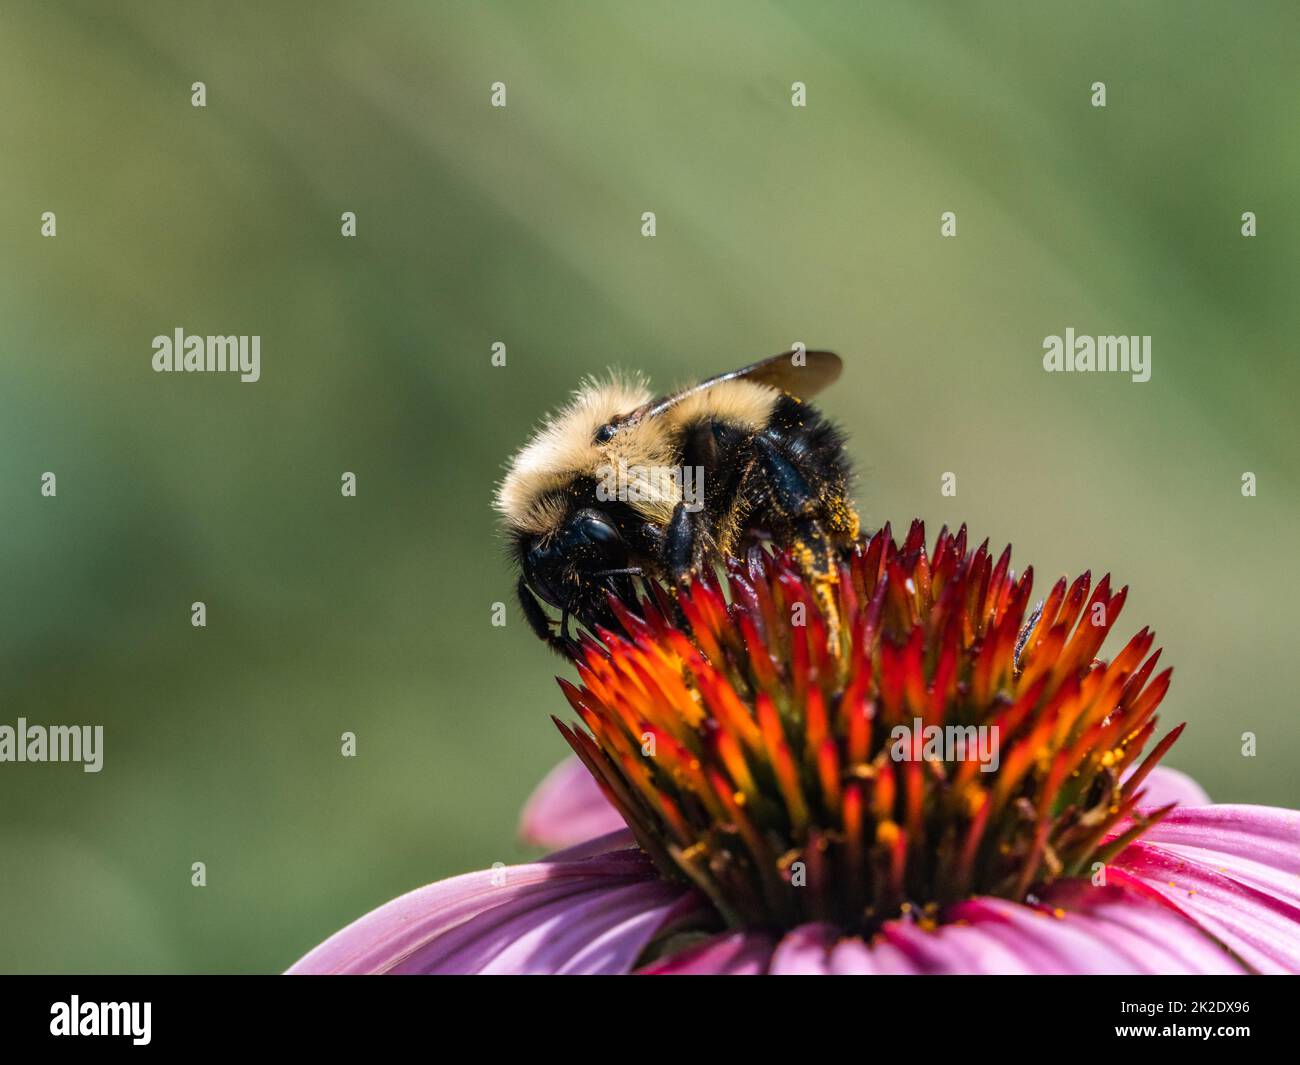 A western Honey Bee, Apis mellifera, on a large lavender daisy type flower in Fish Hatchery Trail County Park, Hayward, Wisconsin. Stock Photo